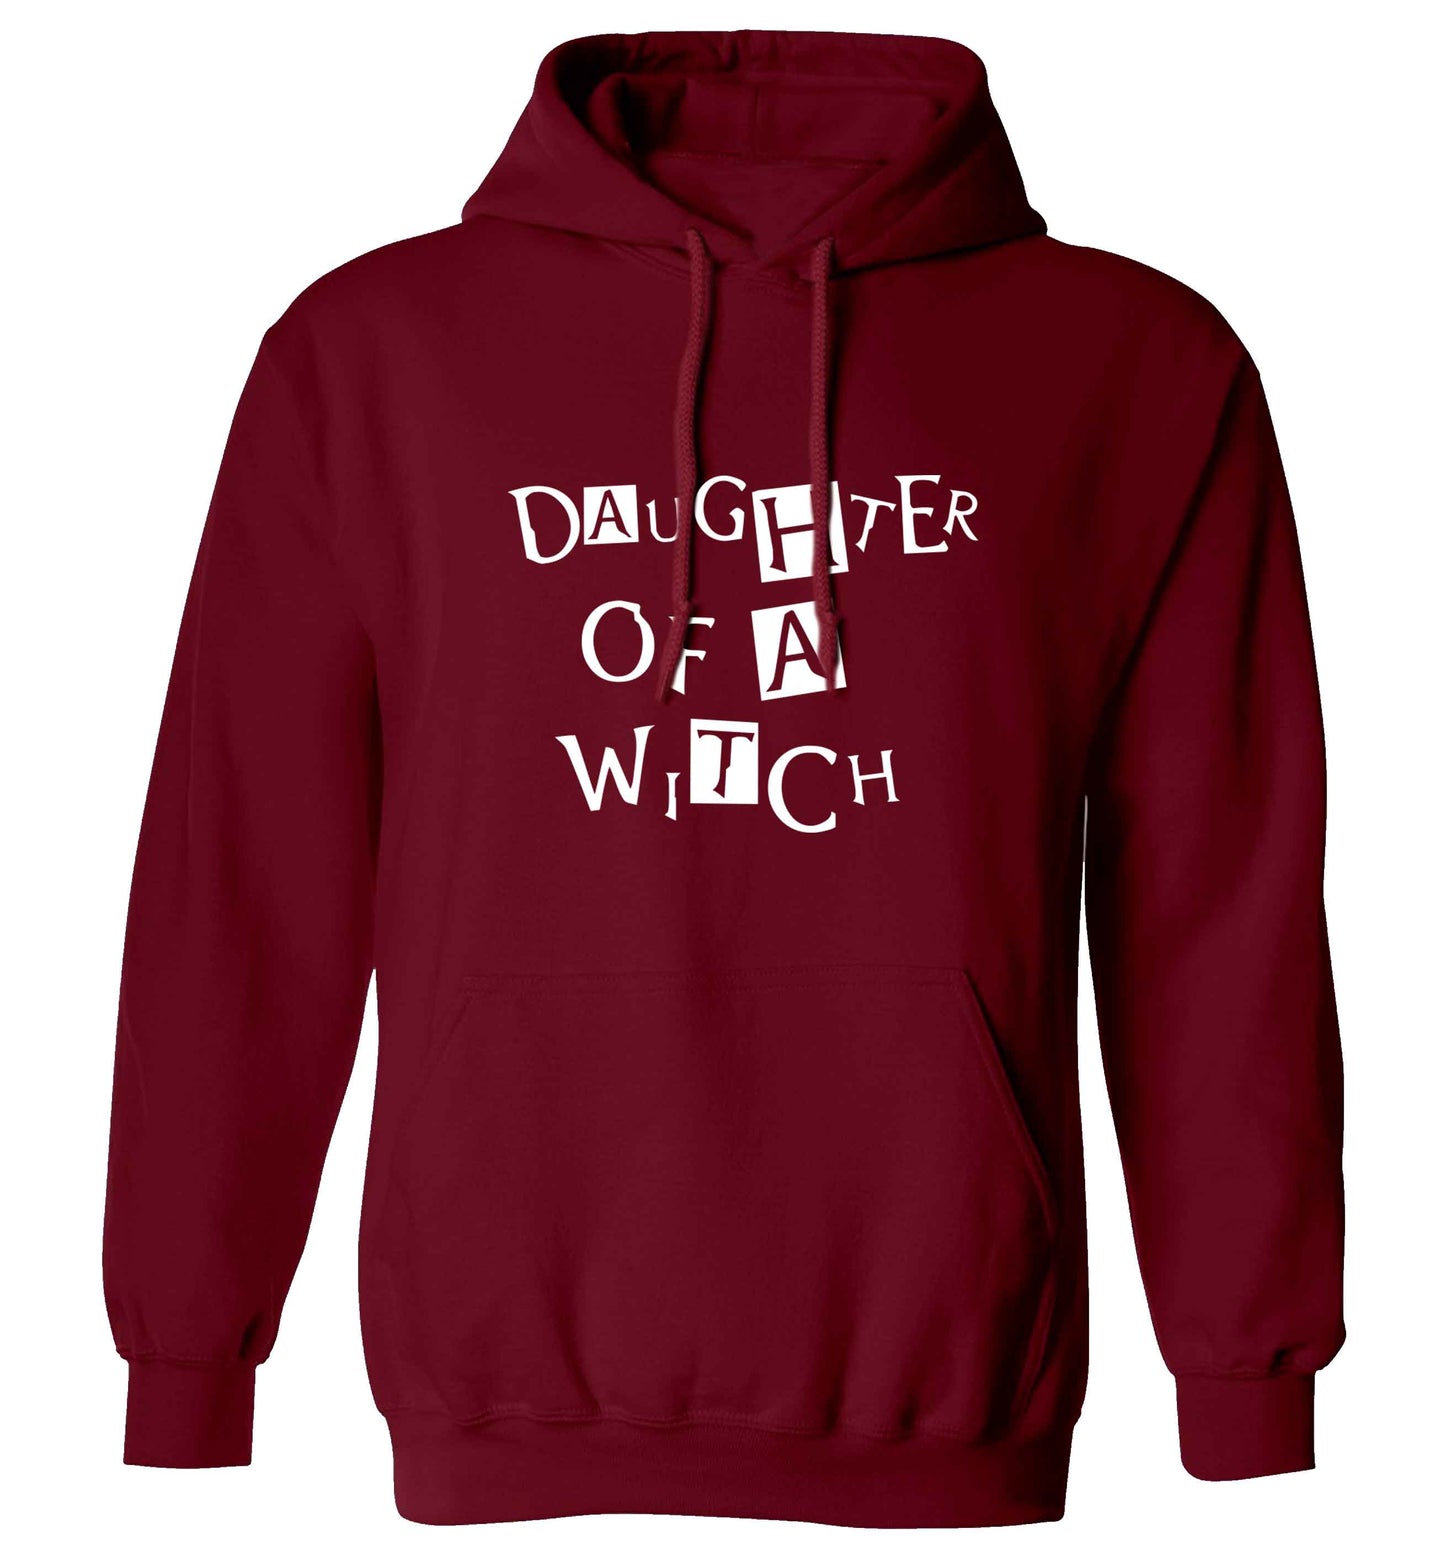 Daughter of a witch adults unisex maroon hoodie 2XL